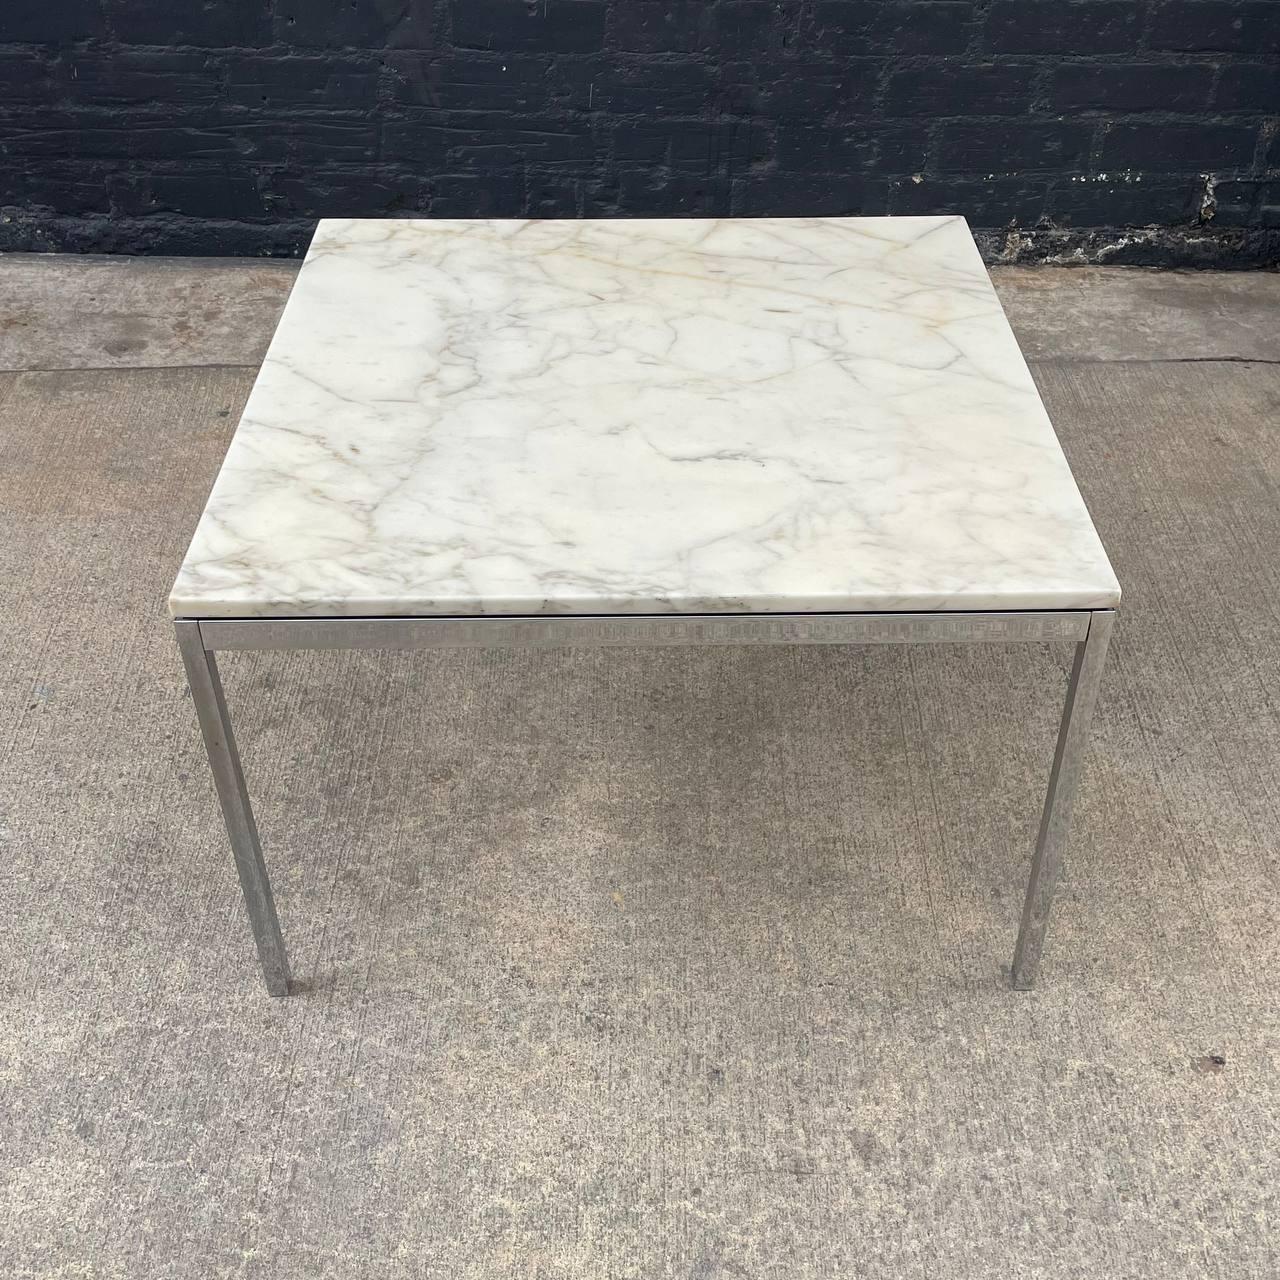 Mid-20th Century Signed Original Mid-Century Modern Carrara Marble Coffee Table by Knoll For Sale